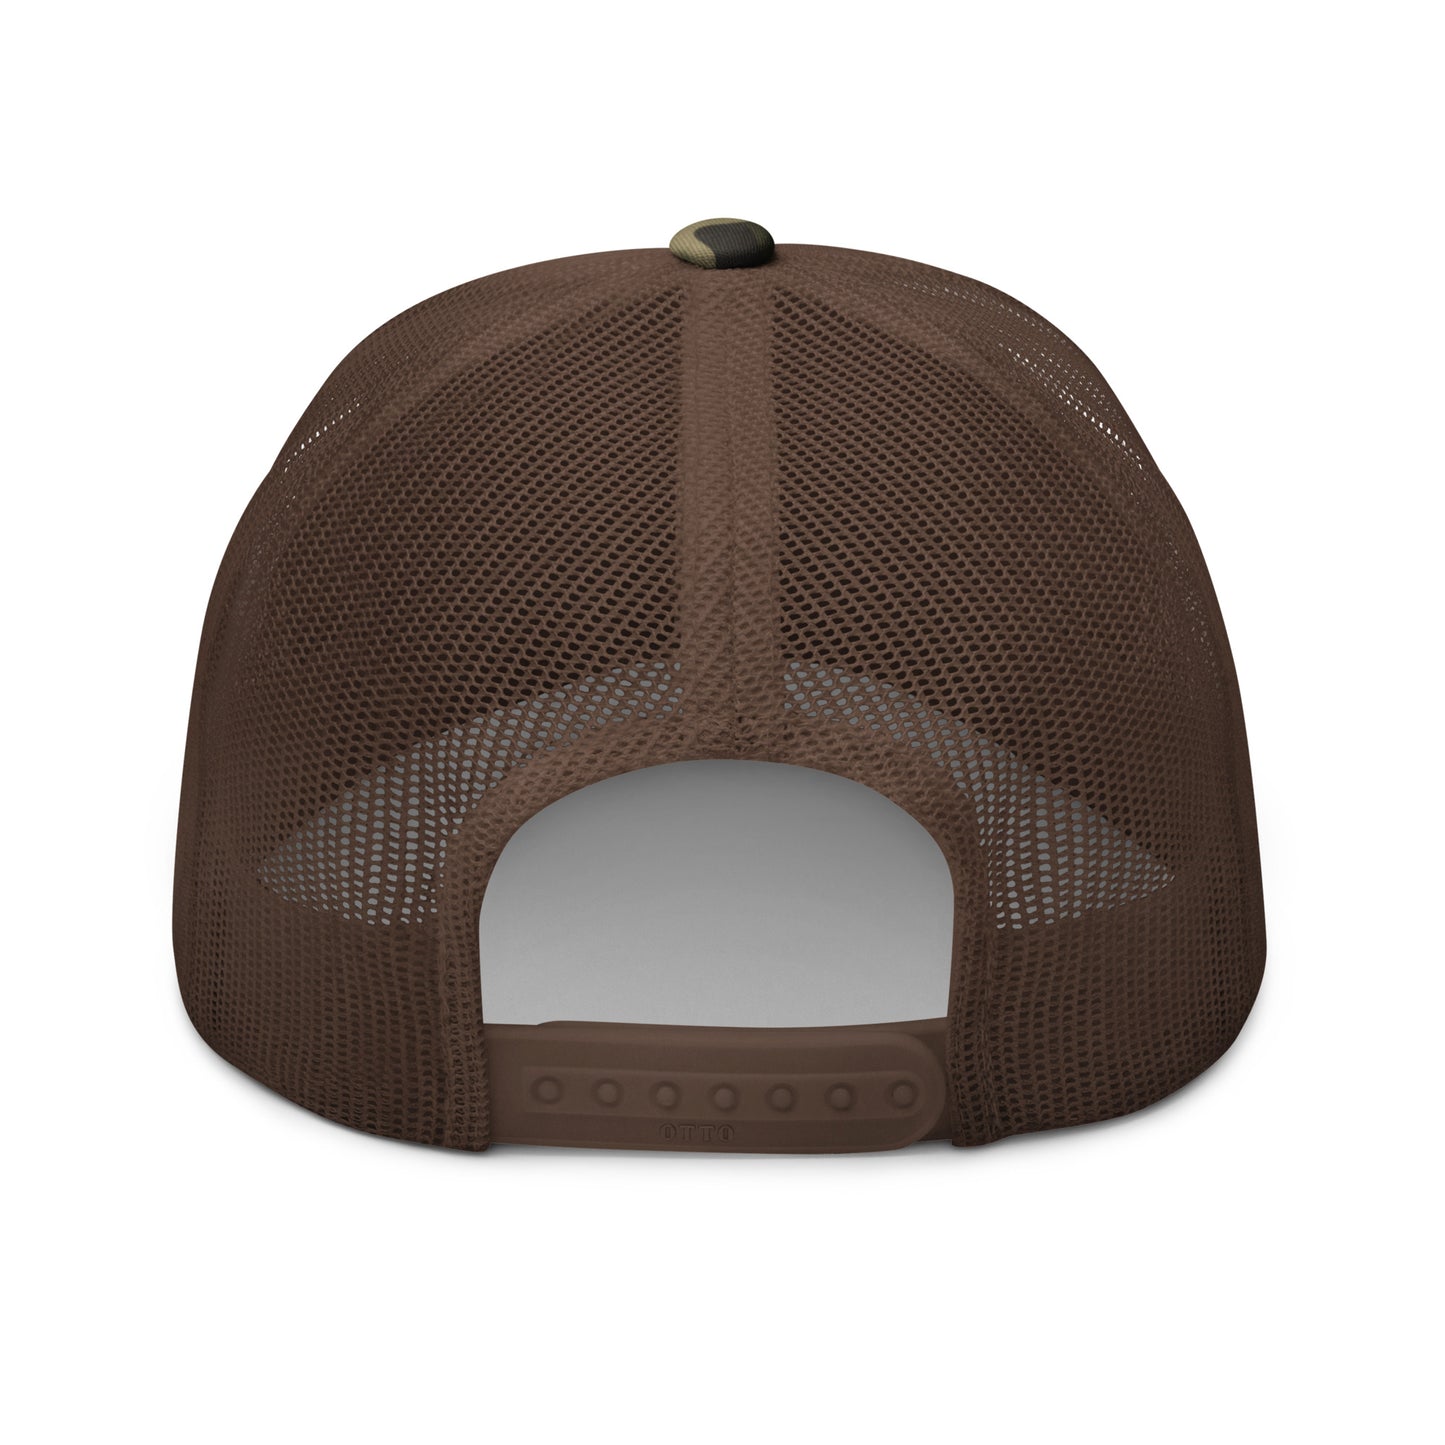 SGPN - Degens Only edition - Camouflage trucker hat - (2 thread color)